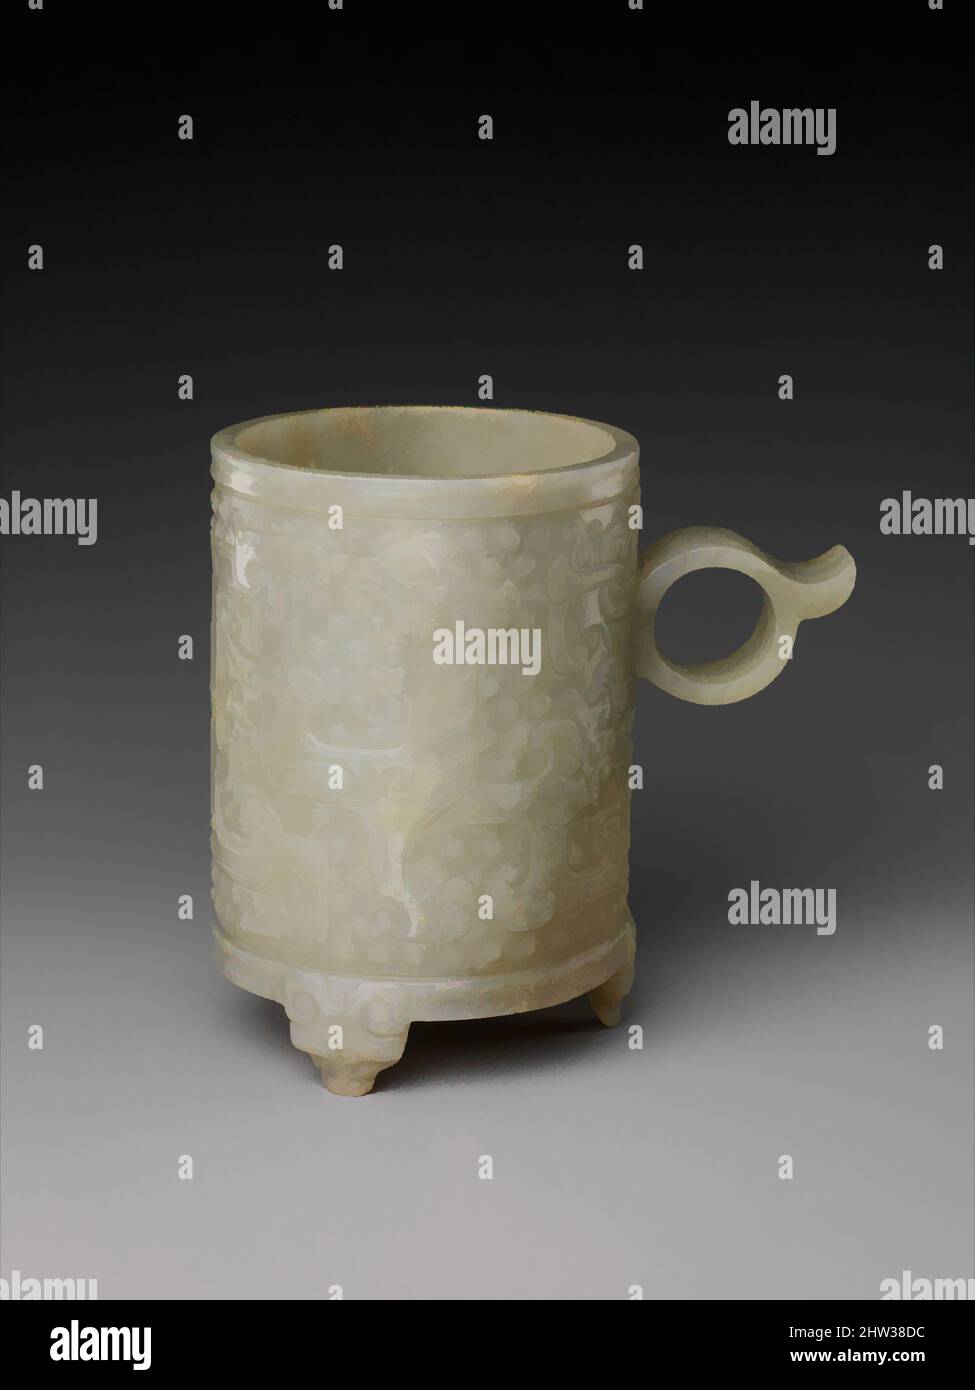 https://c8.alamy.com/comp/2HW38DC/art-inspired-by-cup-with-ring-handle-and-archaic-designs-ming-13681644-to-qing-16441911-dynasty-16th17th-century-china-jade-nephrite-h-3-34-in-95-cm-jade-the-abstract-bodies-of-the-two-intertwined-birds-on-the-surface-of-this-cup-can-be-traced-to-the-bronze-age-classic-works-modernized-by-artotop-with-a-splash-of-modernity-shapes-color-and-value-eye-catching-visual-impact-on-art-emotions-through-freedom-of-artworks-in-a-contemporary-way-a-timeless-message-pursuing-a-wildly-creative-new-direction-artists-turning-to-the-digital-medium-and-creating-the-artotop-nft-2HW38DC.jpg